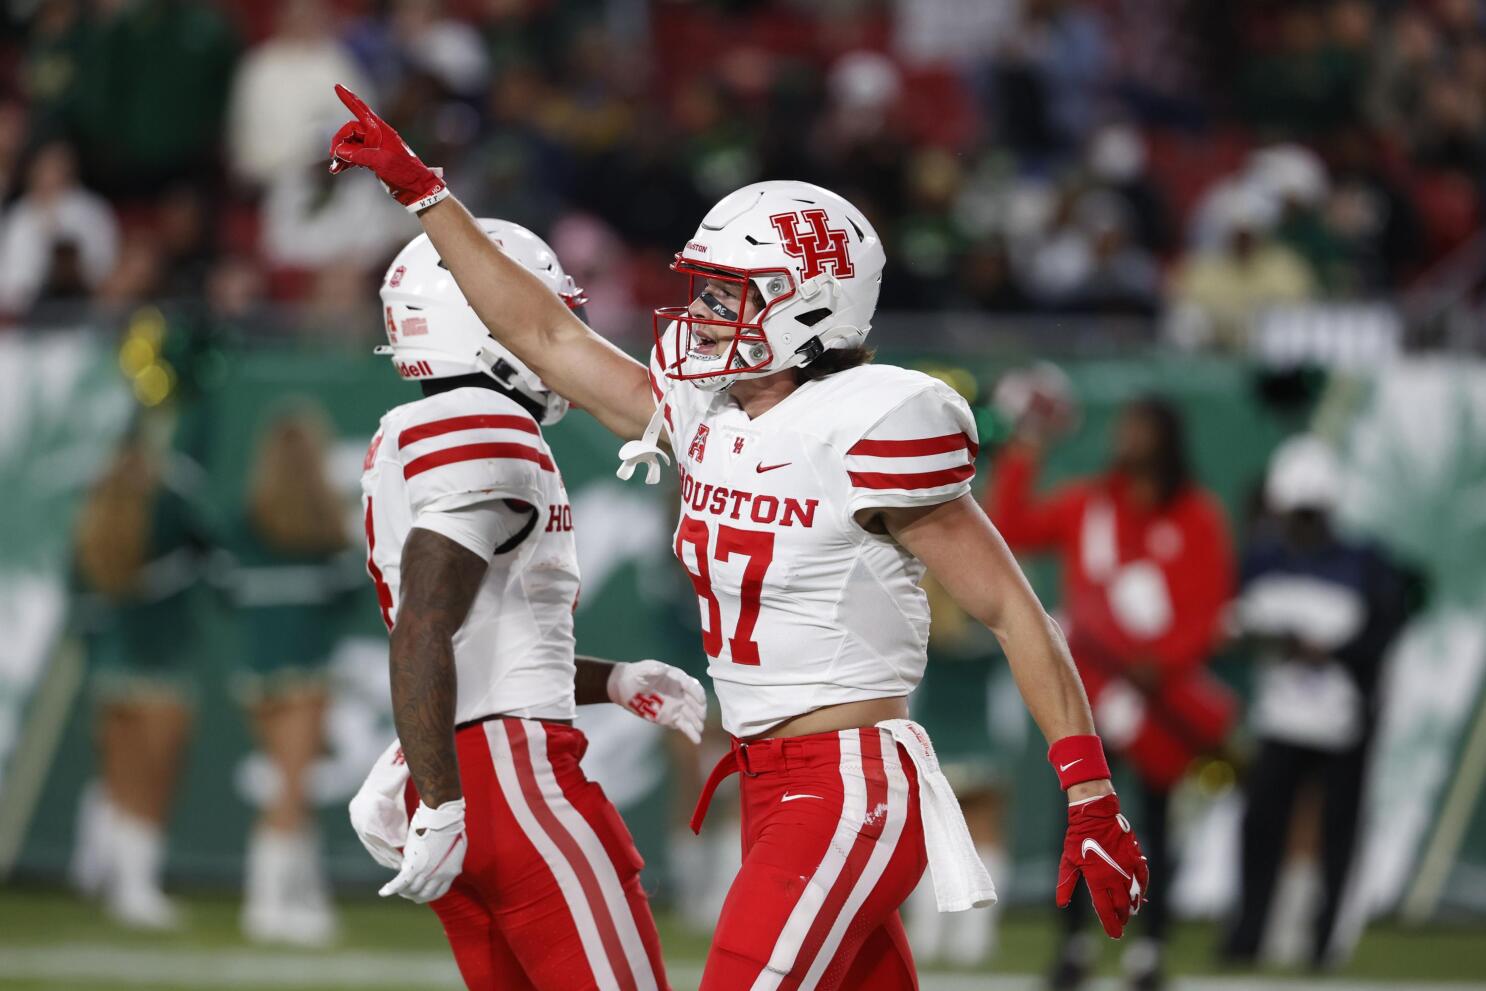 Houston Football: Will the Cougars be back in 2021? - Page 2